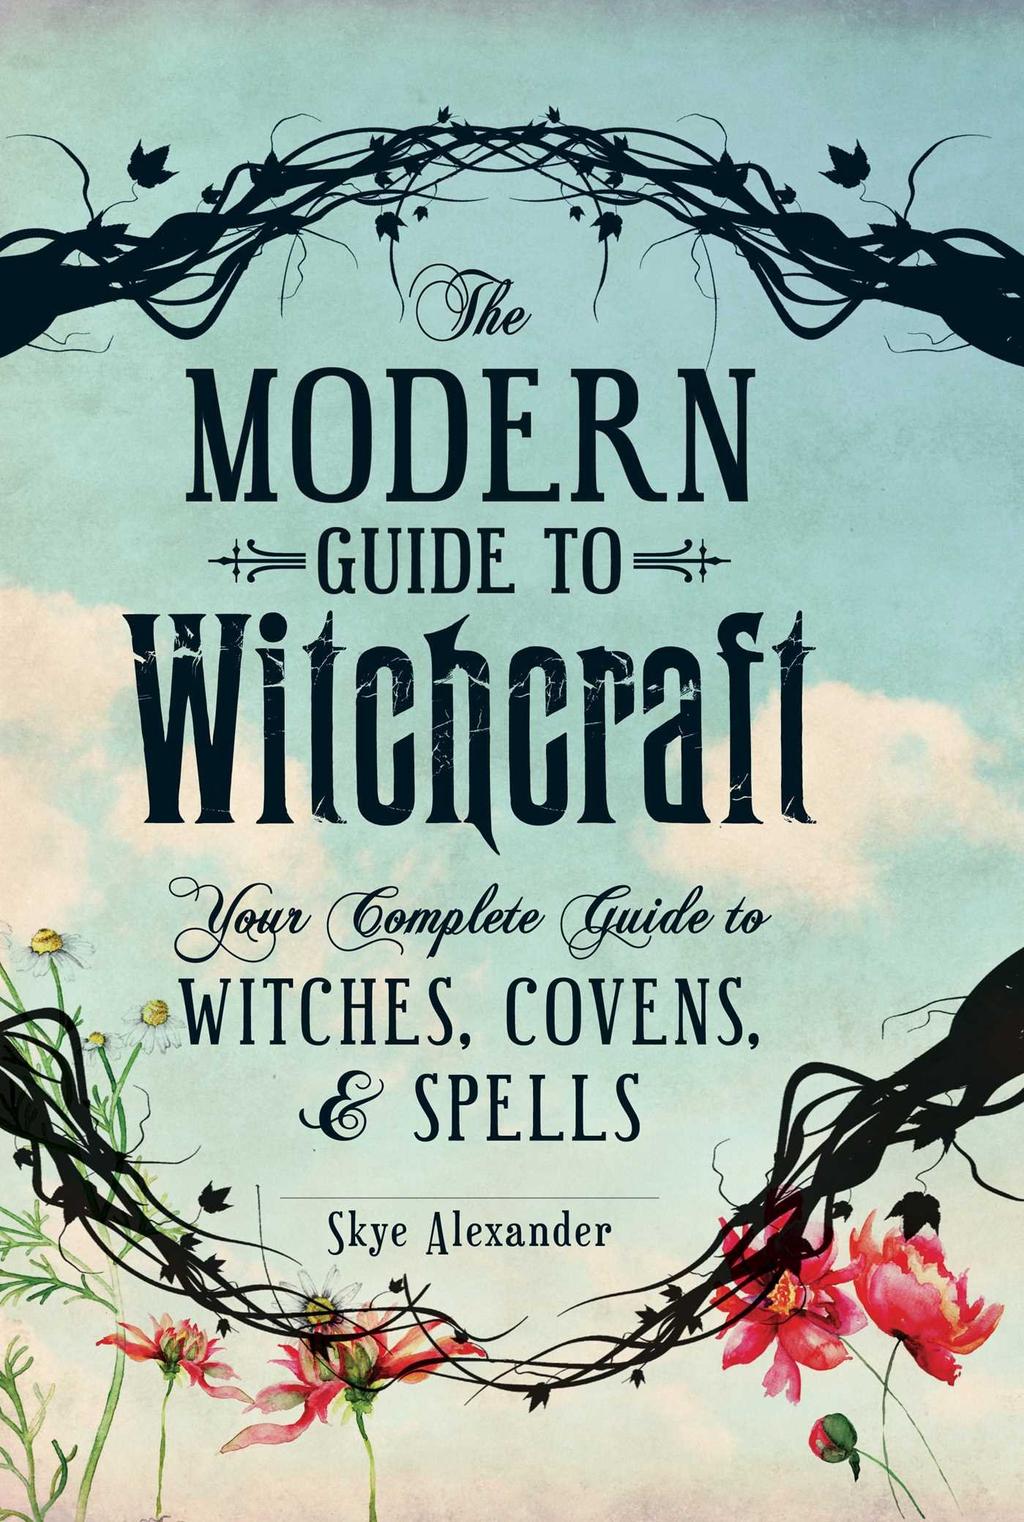 modern guide to witchcraft Main image  width="825" height="699"